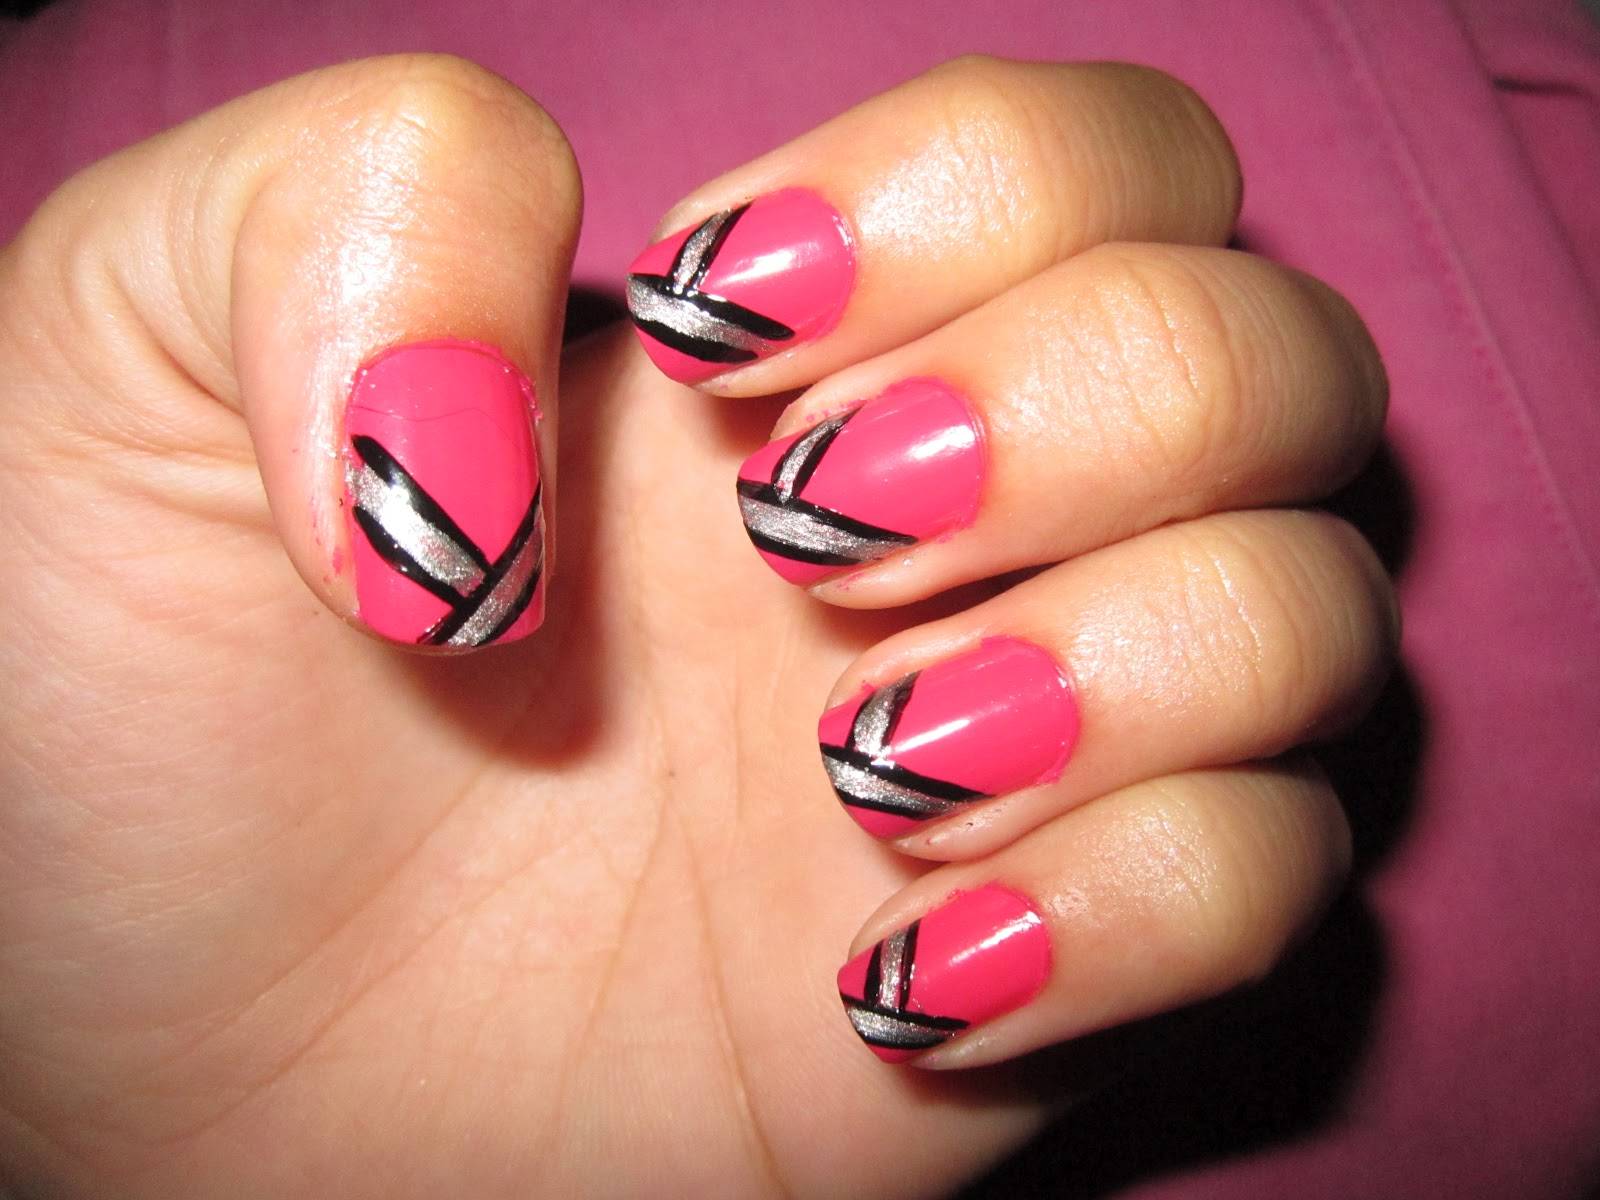 2. Cute and Easy Nail Art Ideas - wide 3